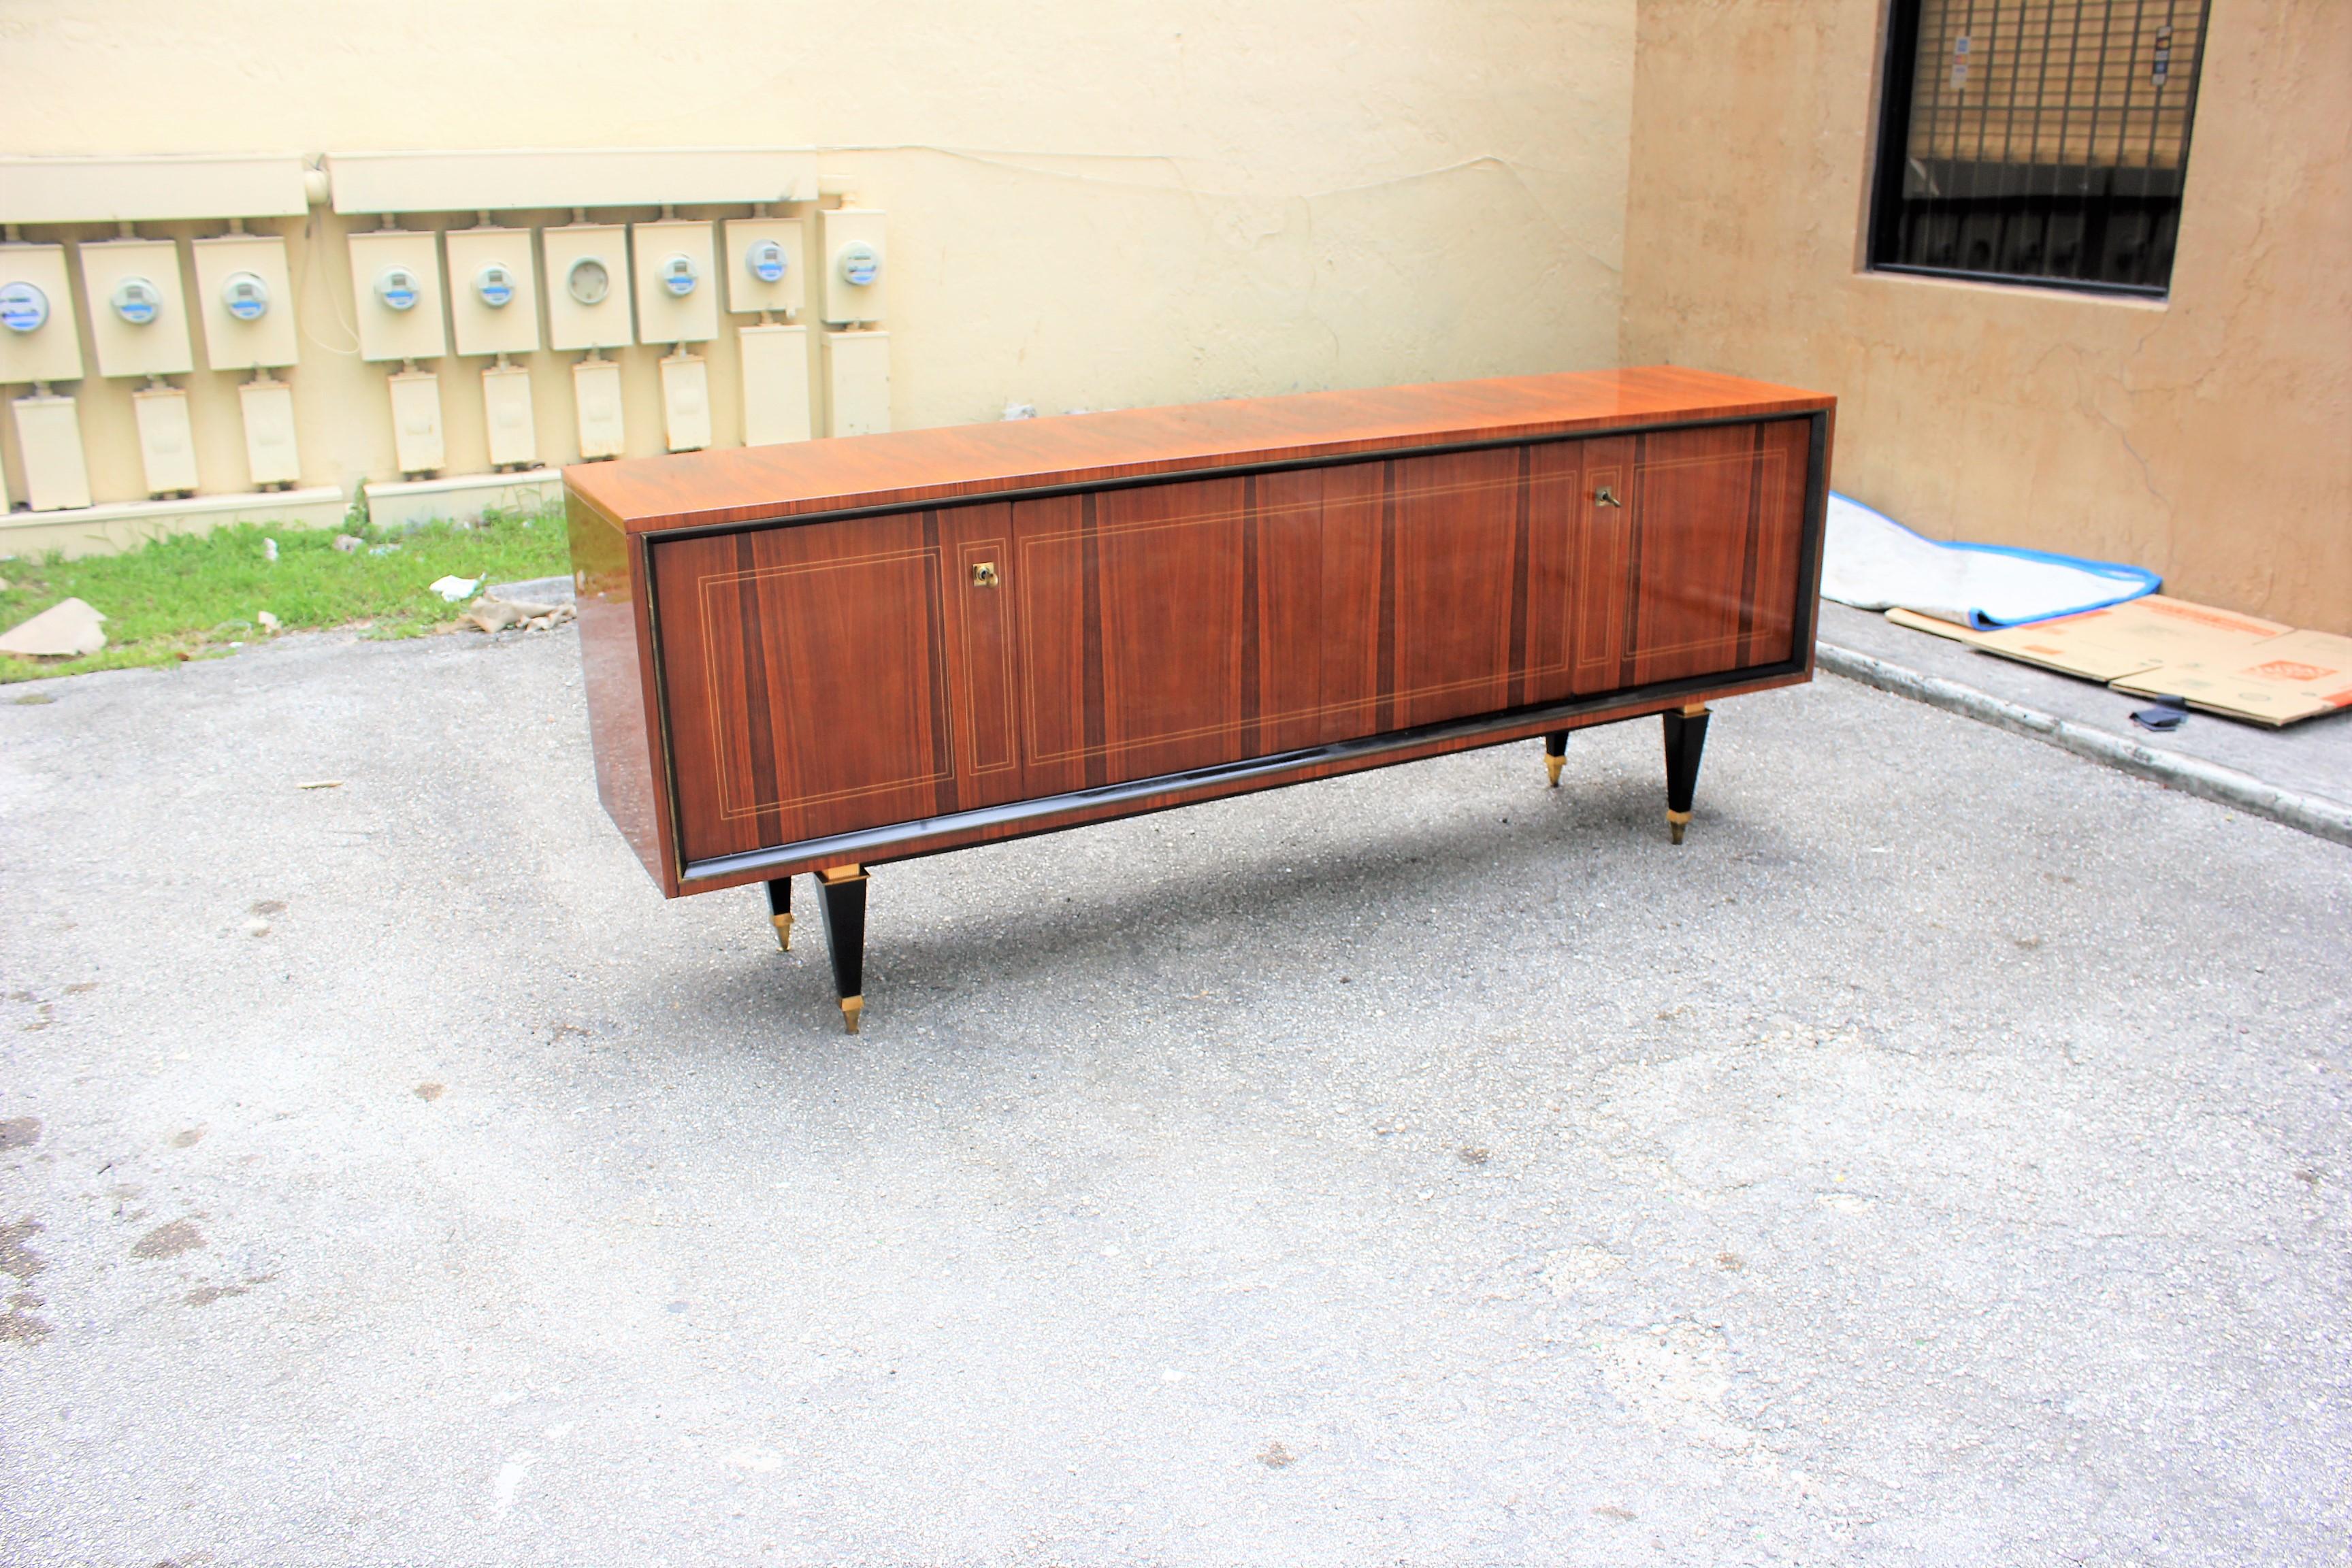 Beautiful French Art Deco exotic Macassar ebony sideboard, buffet or bar, circa 1940s. the sideboard are in very good condition, with three drawers inside, with two shelves adjustable, and bar section, you can remove all the shelves if you need more